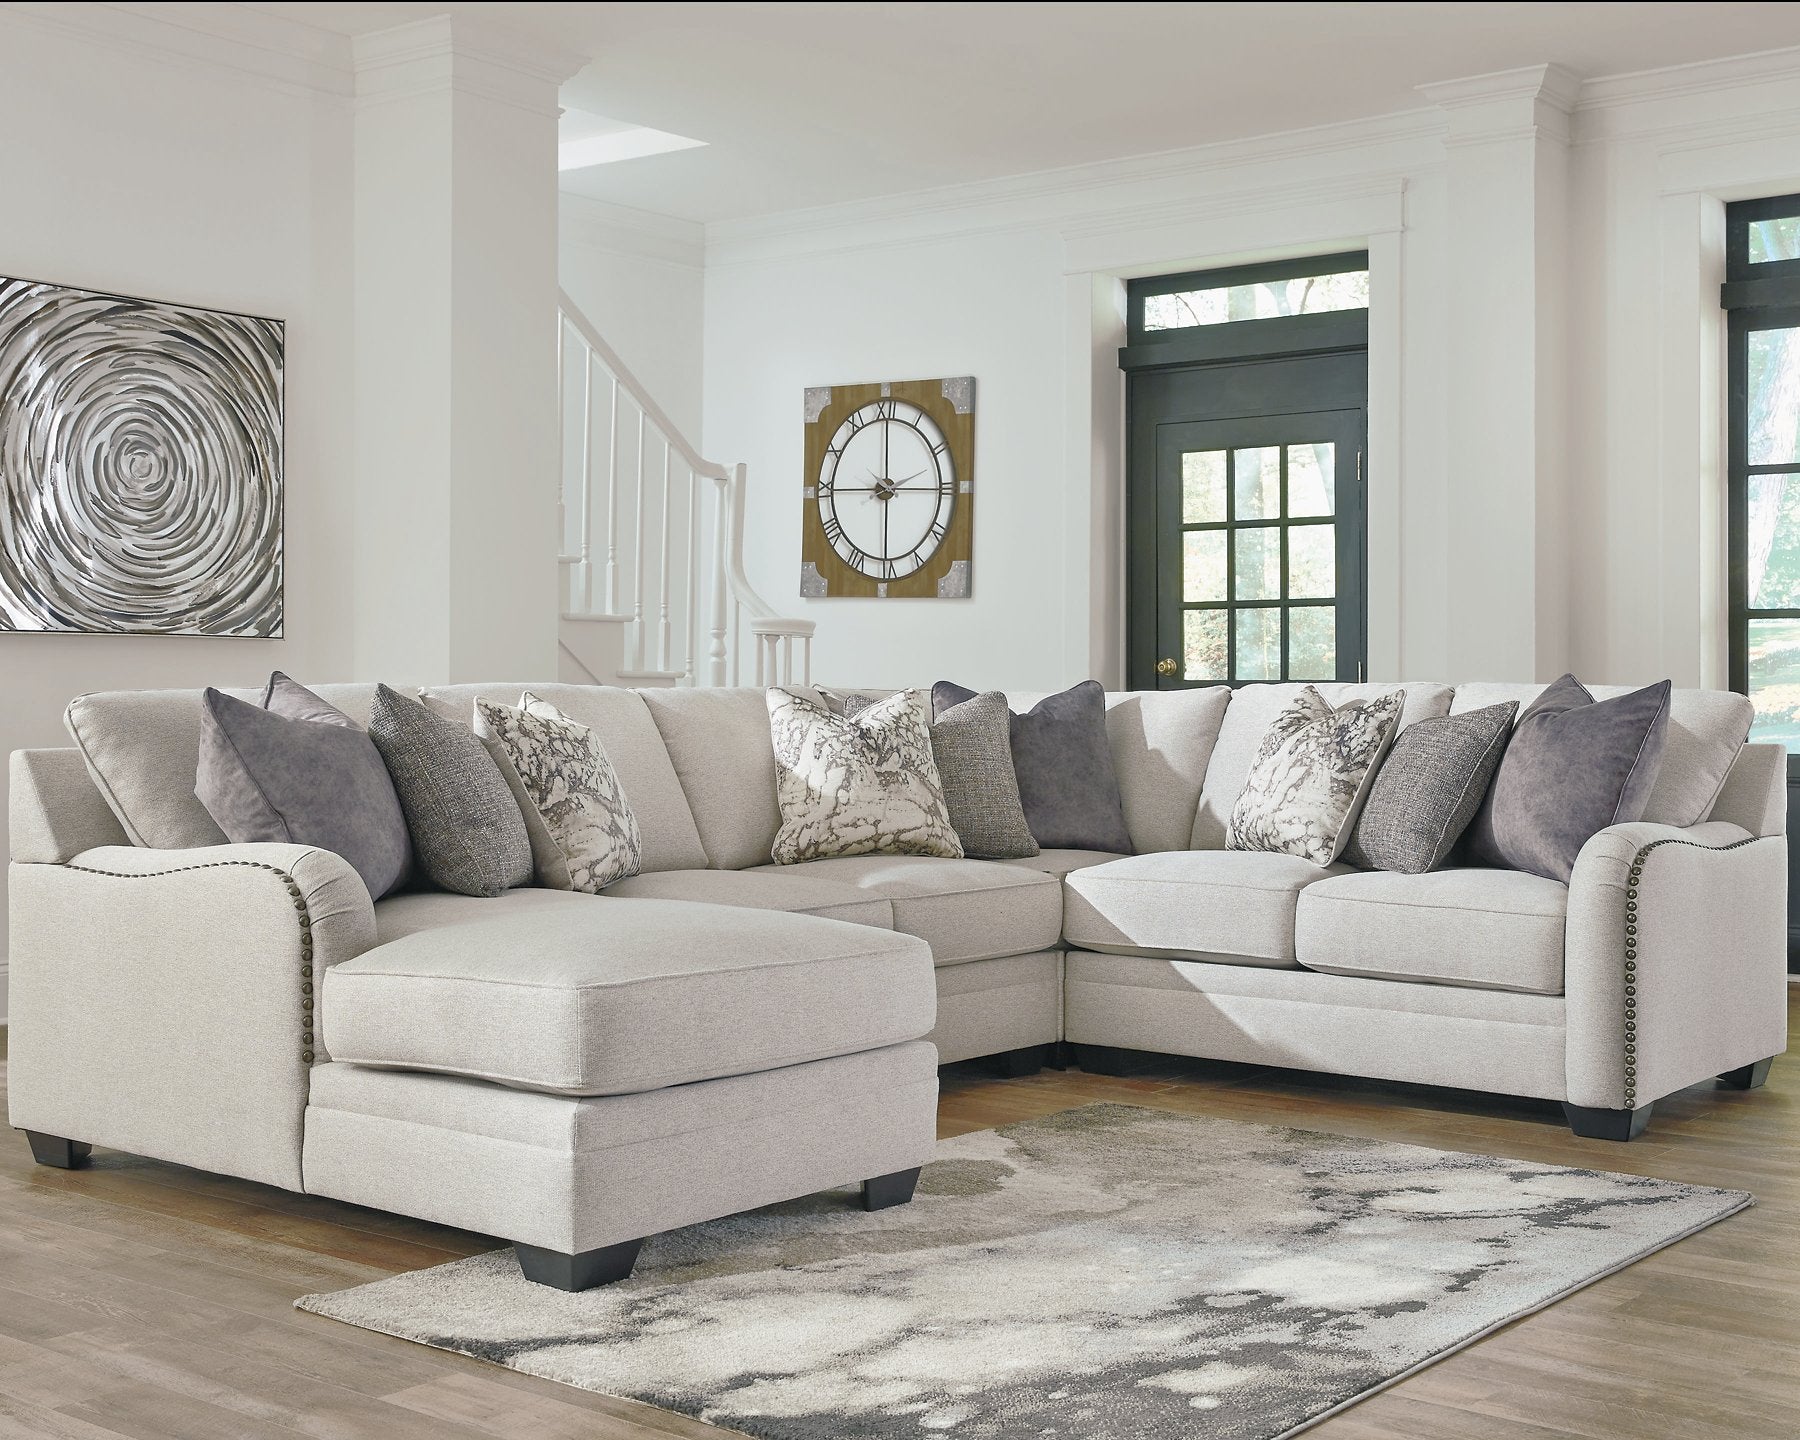 Dellara Sectional with Chaise